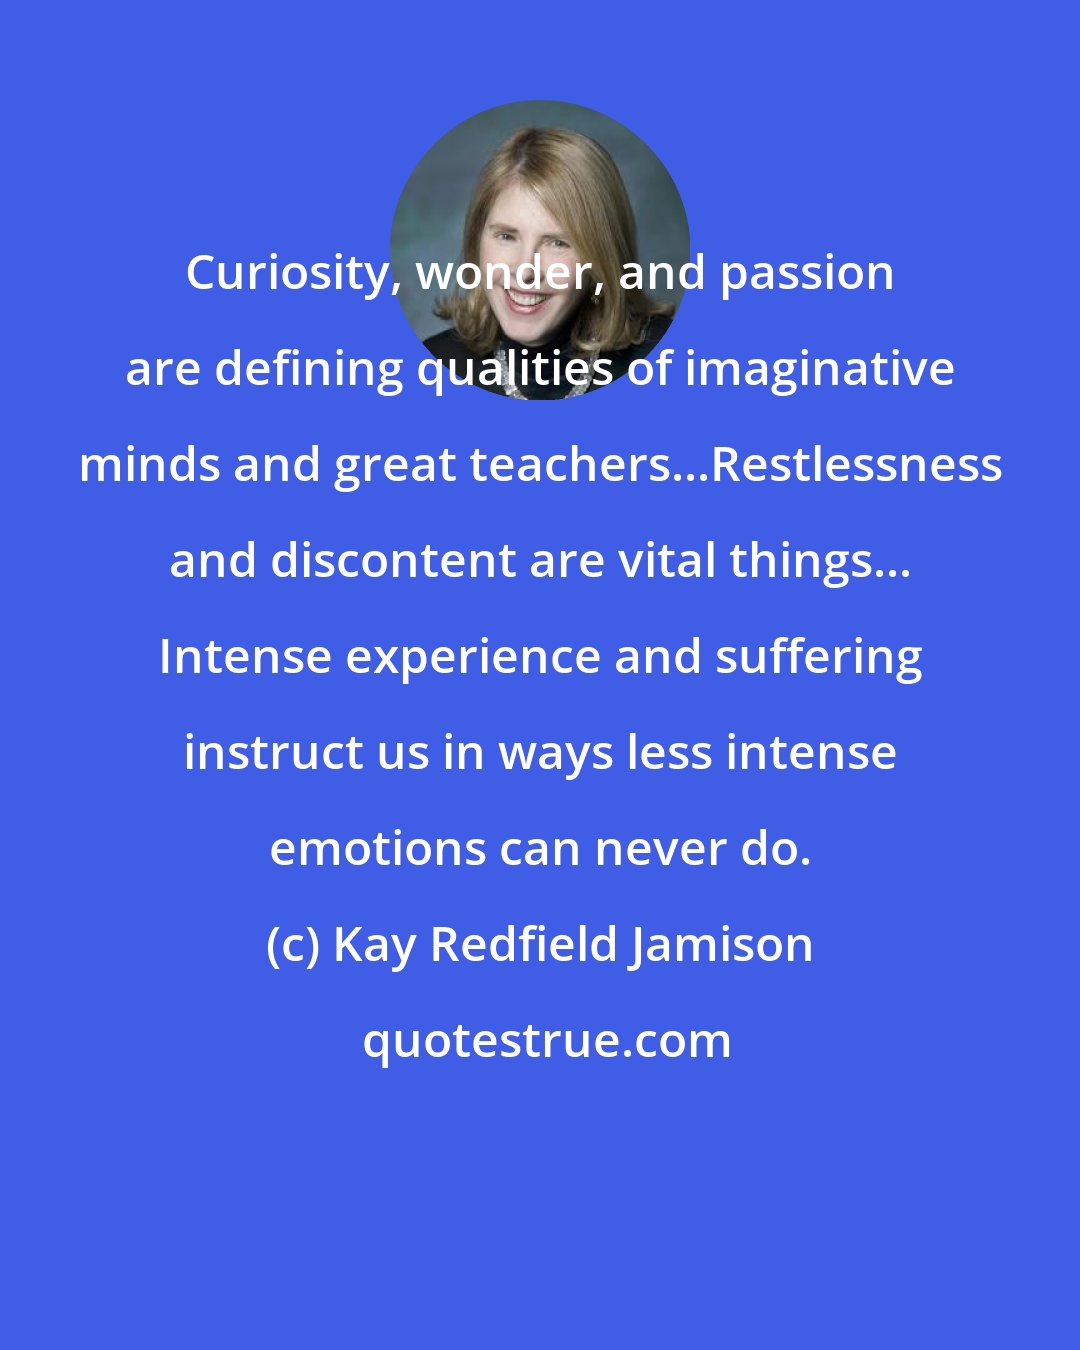 Kay Redfield Jamison: Curiosity, wonder, and passion are defining qualities of imaginative minds and great teachers...Restlessness and discontent are vital things... Intense experience and suffering instruct us in ways less intense emotions can never do.